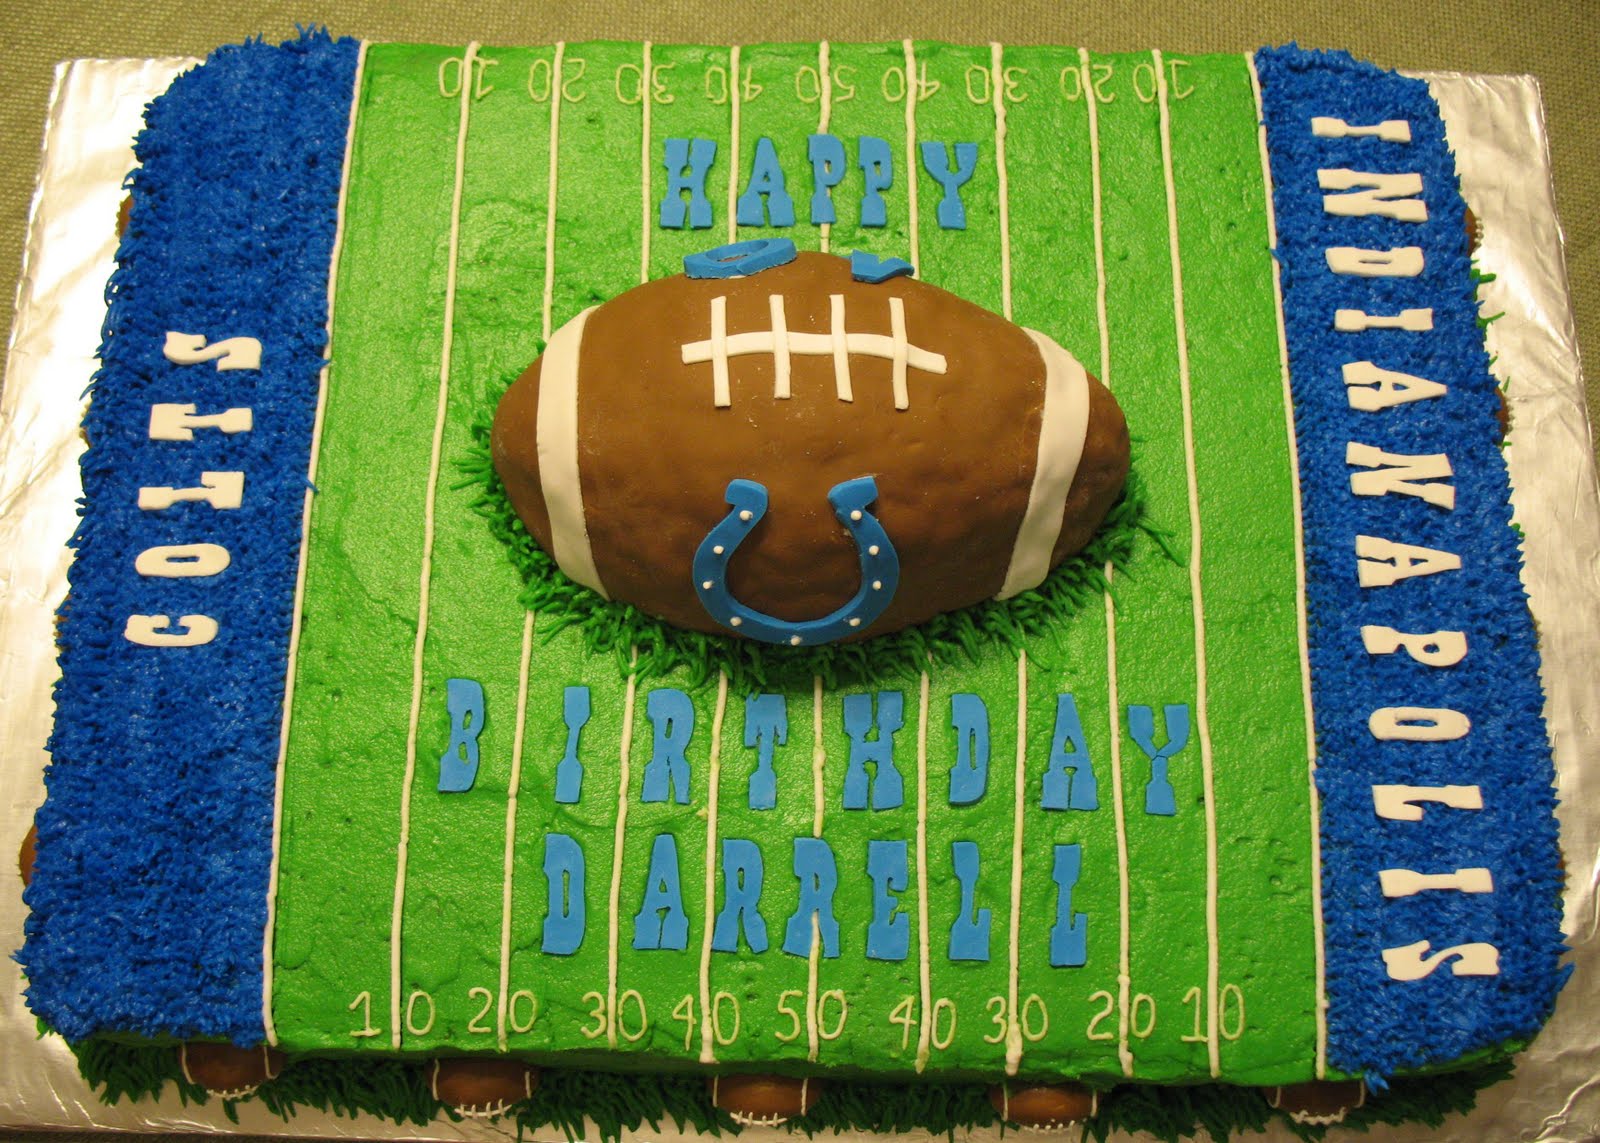 HOW TO DECORATE A FOOTBALL COURT CAKE WITH CHANTILLY